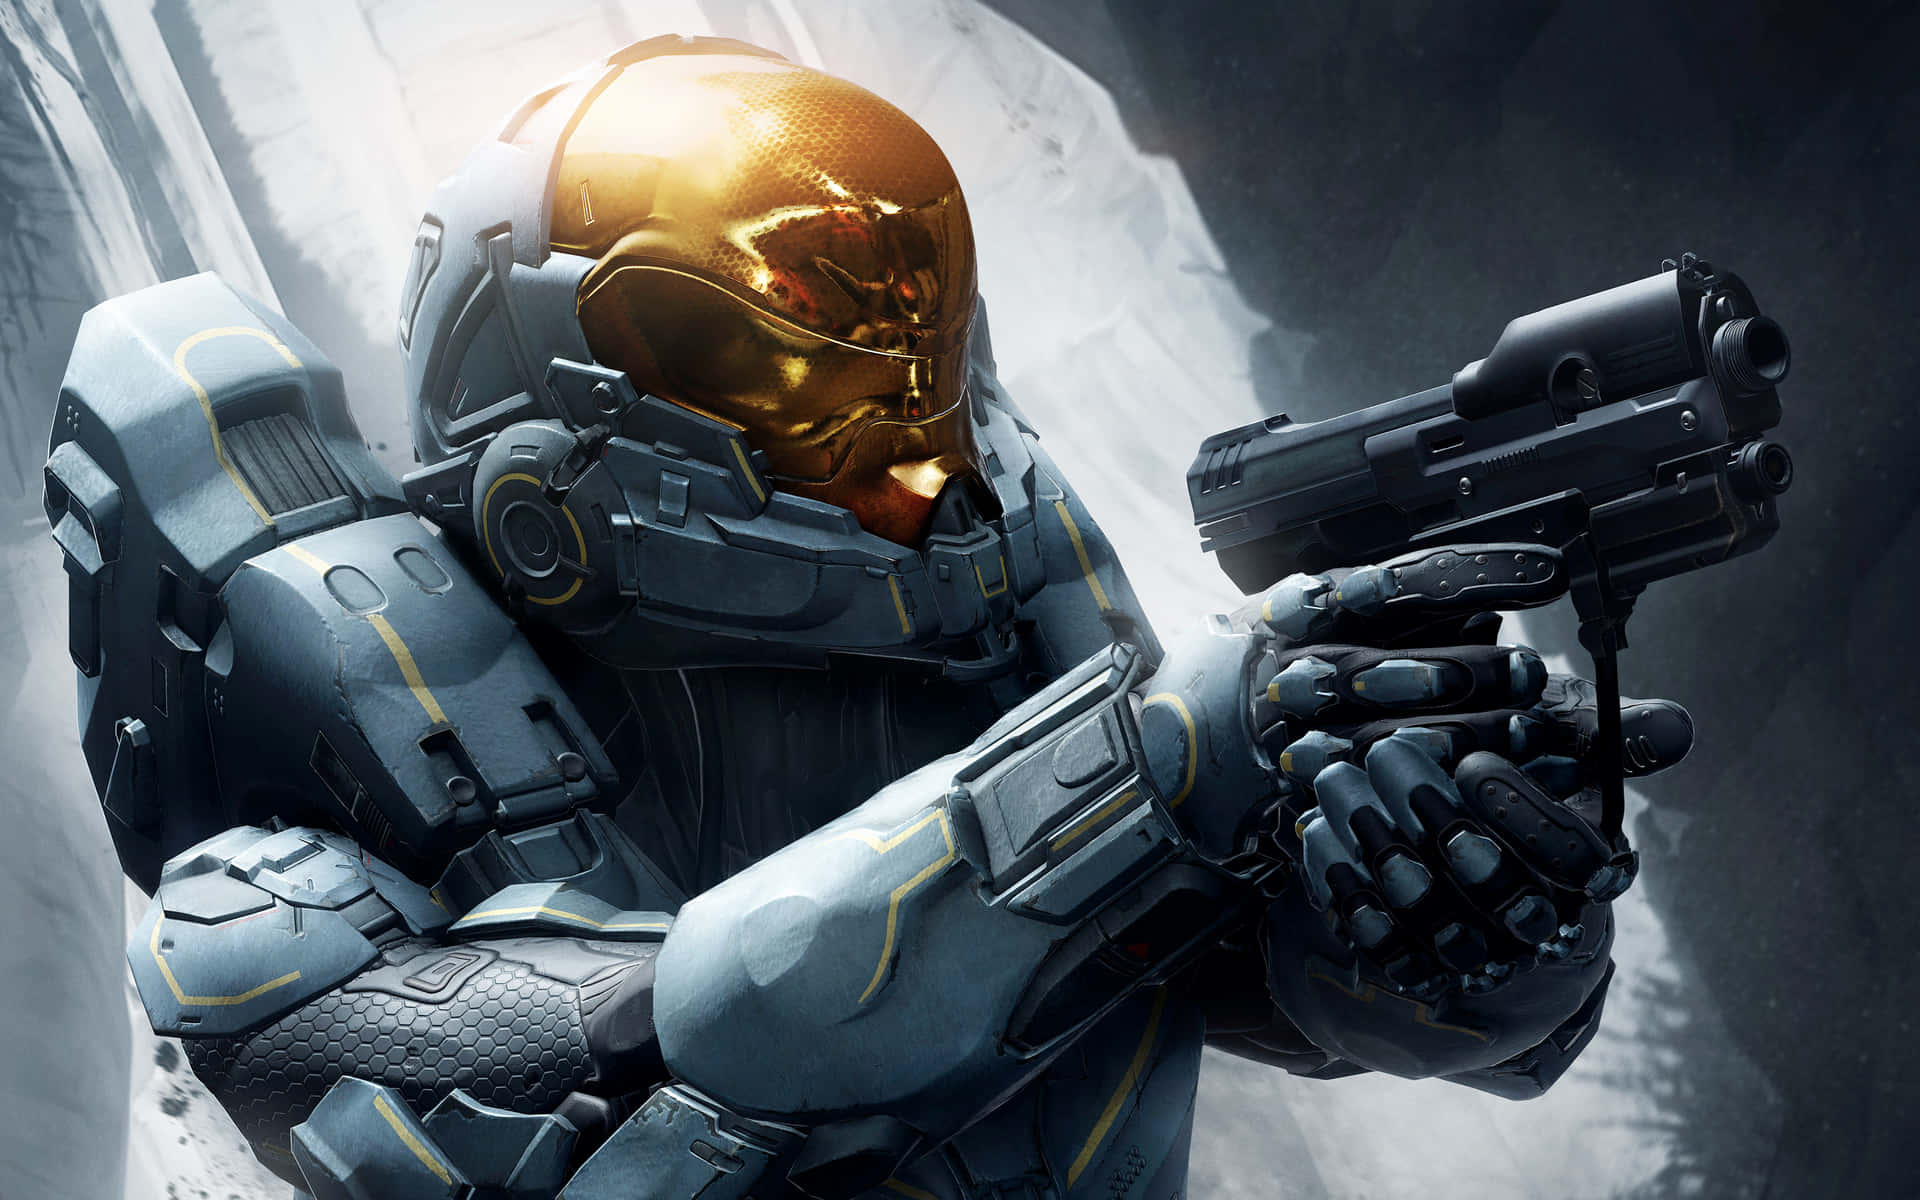 Prepare for intense battles in the epic world of Halo